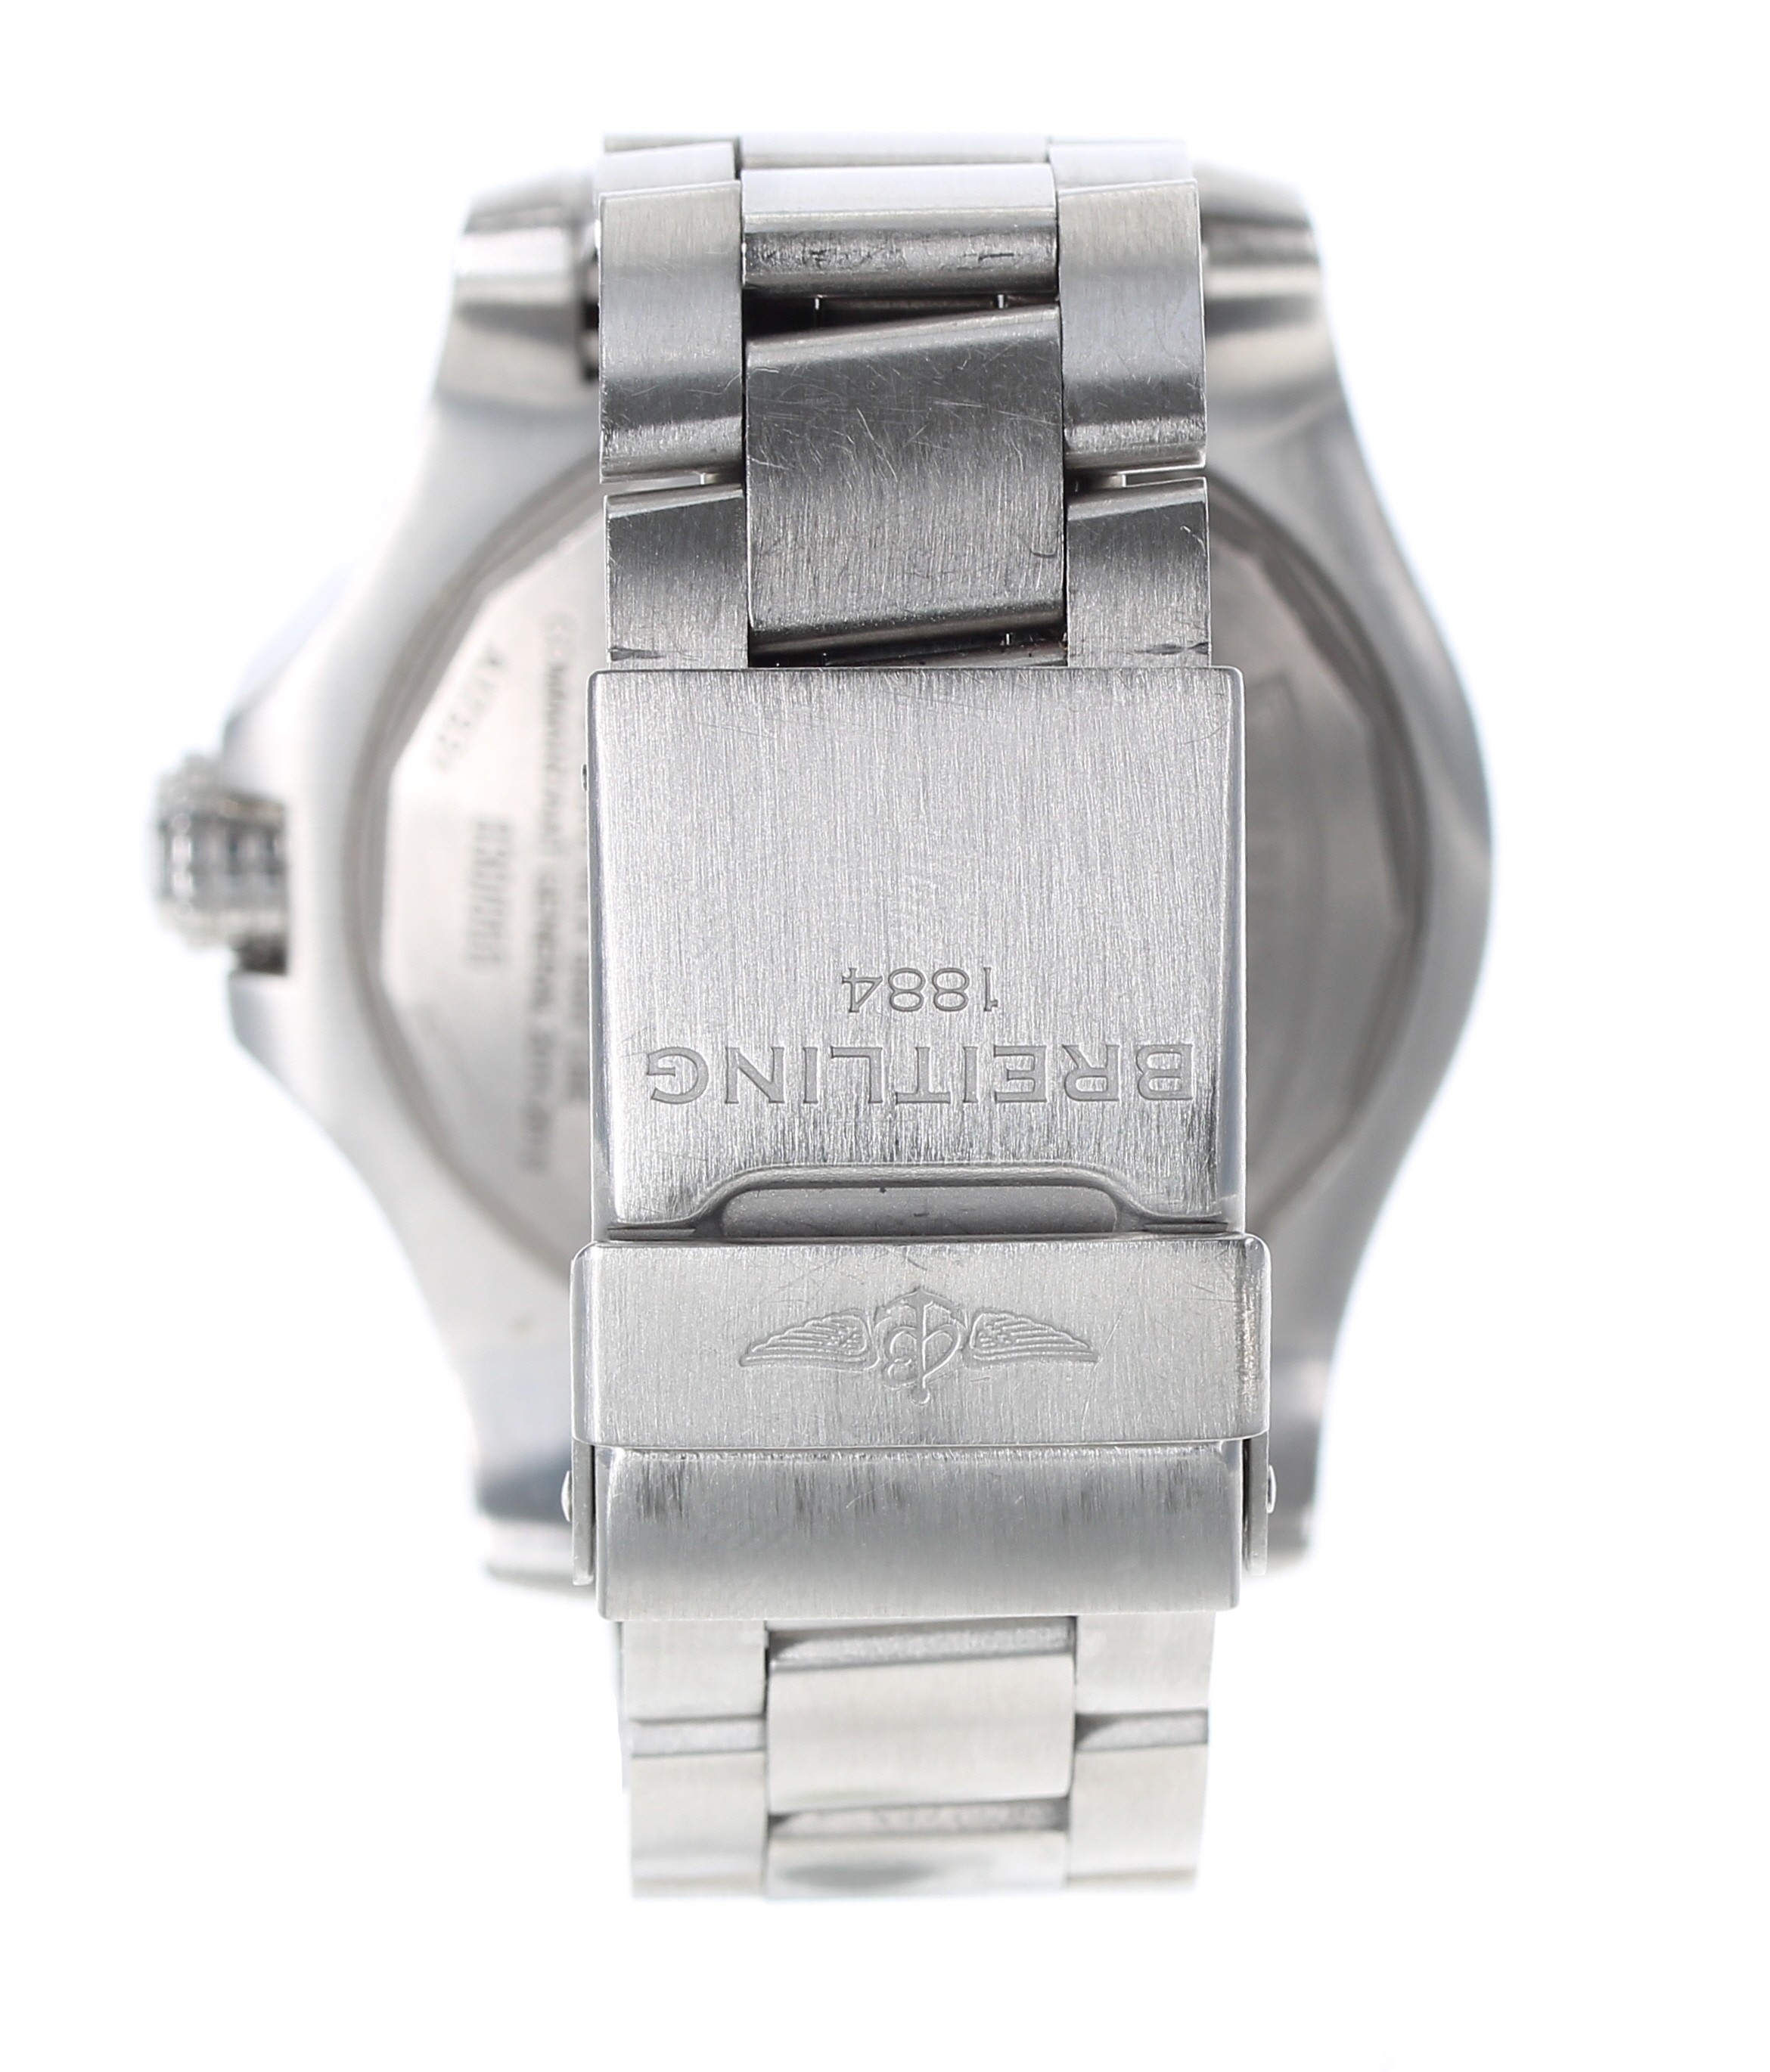 Breitling 'R.A.F Regiment' 75th Anniversary stainless steel automatic gentleman's wristwatch, - Image 4 of 5